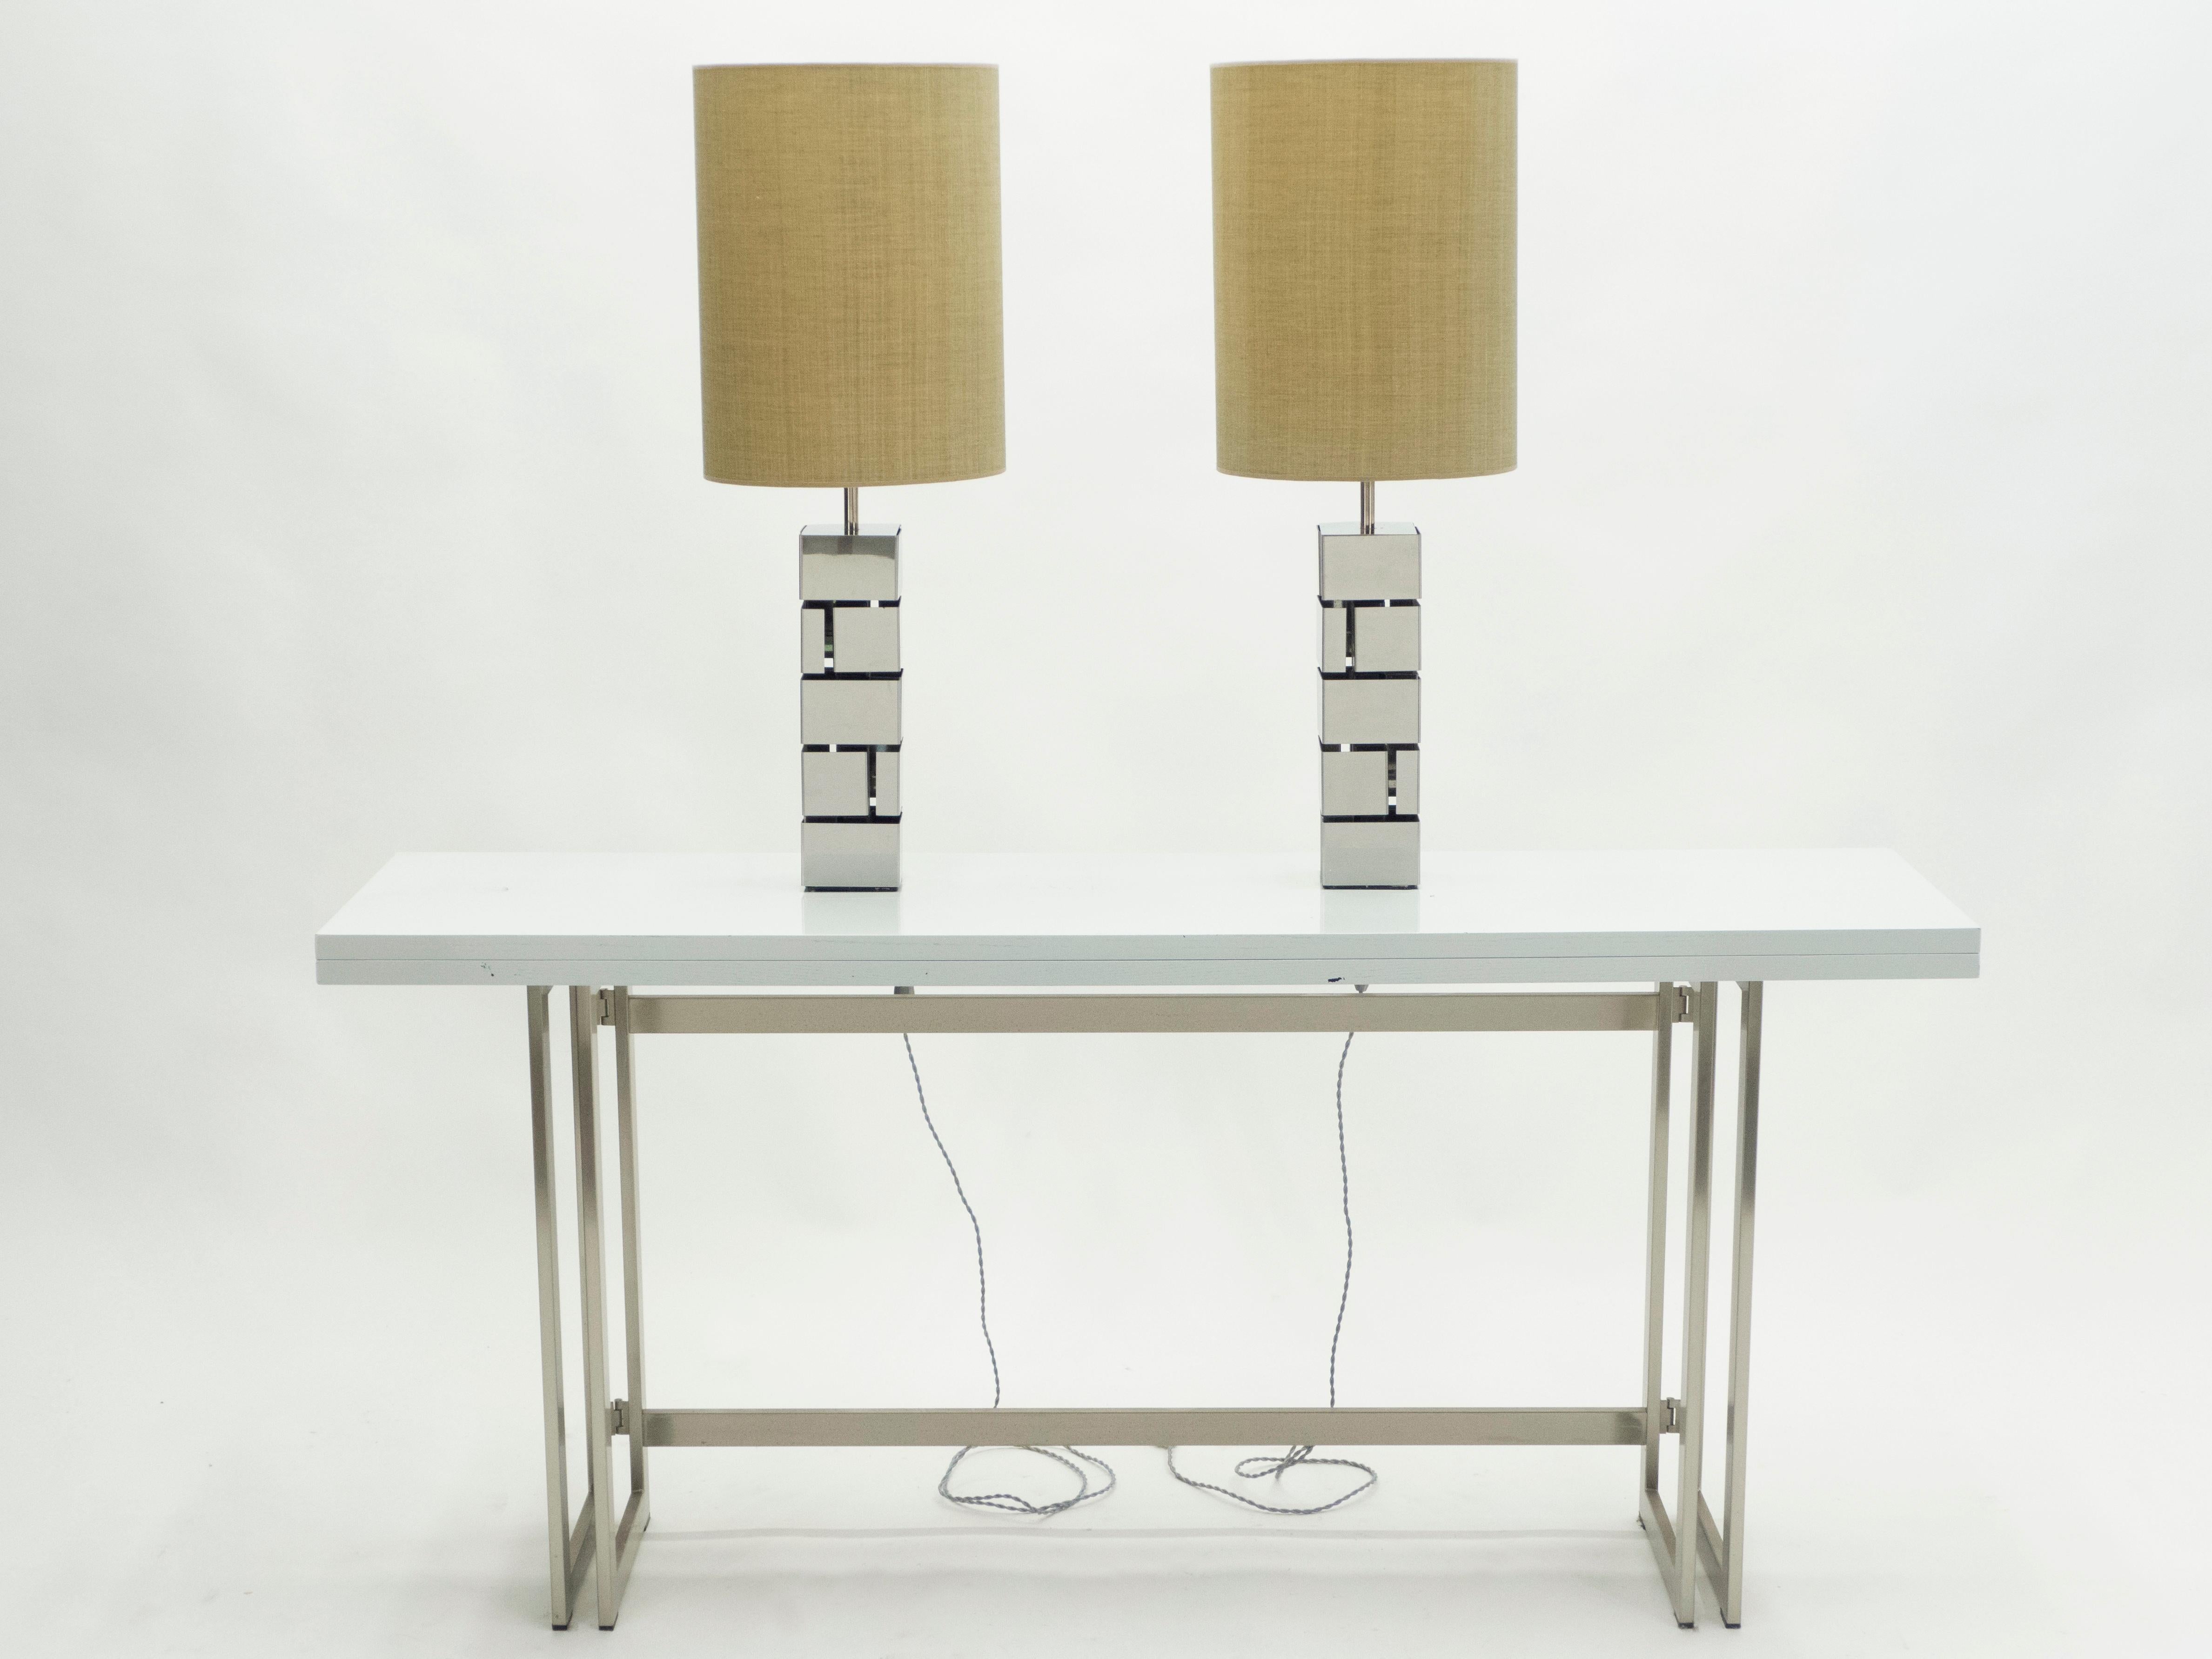 This pair of lamps is typical of designer Curtis Jere’s midcentury metal. A rich and architectural chrome structure with beautifully textured custom made lampshades feels serious and sophisticated. Their minimal design and trendy coloring makes them